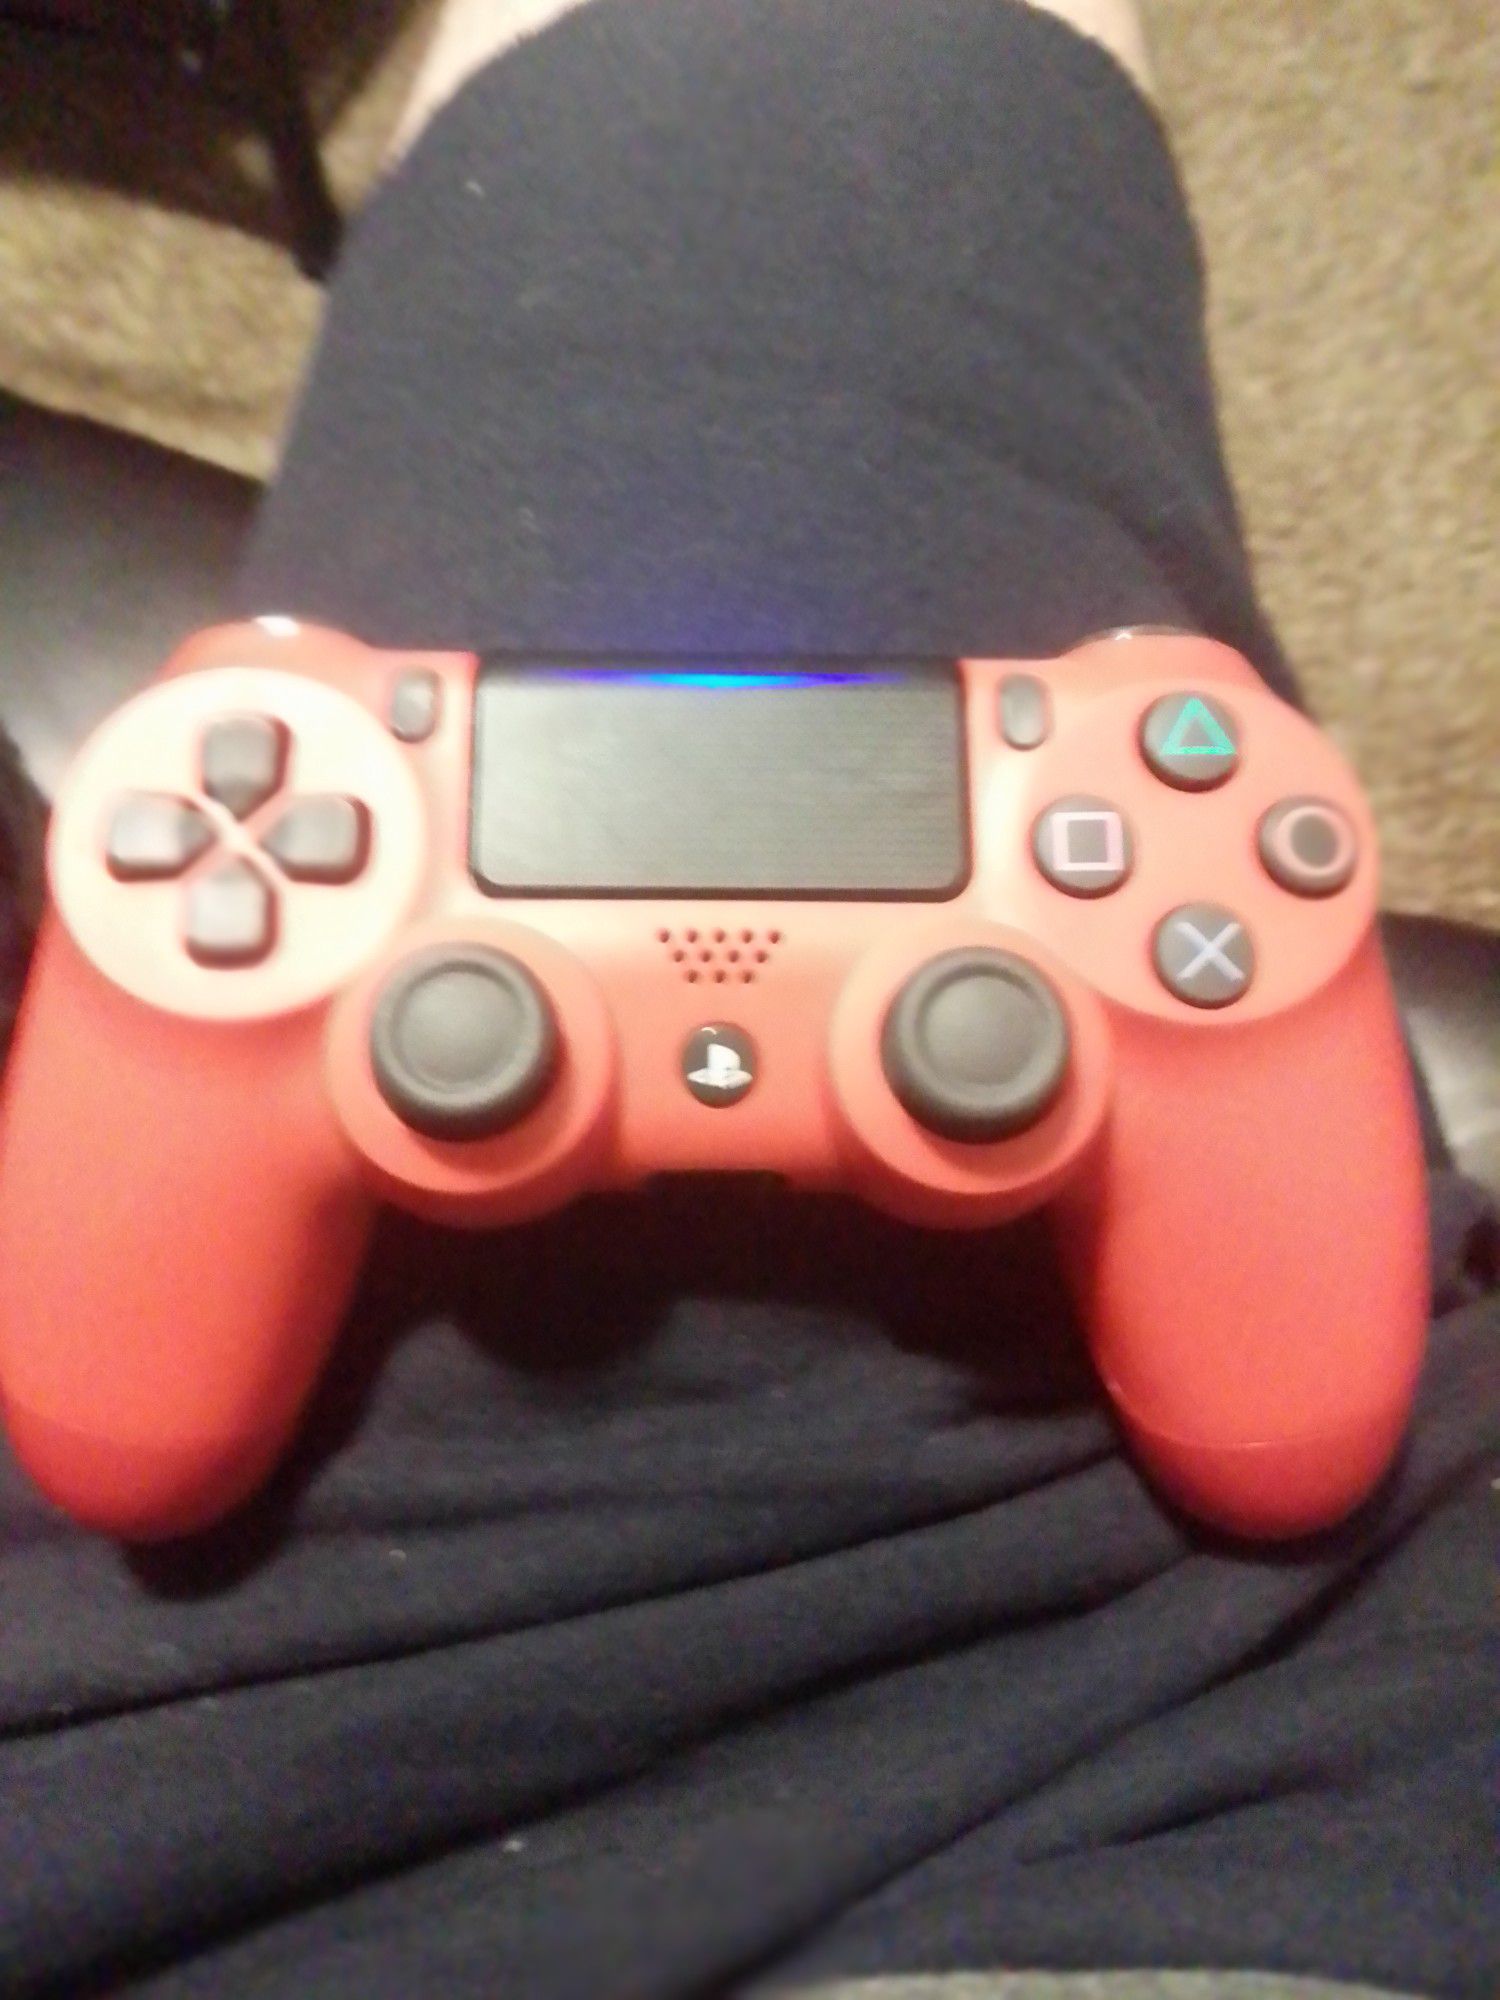 Red PS4 controller